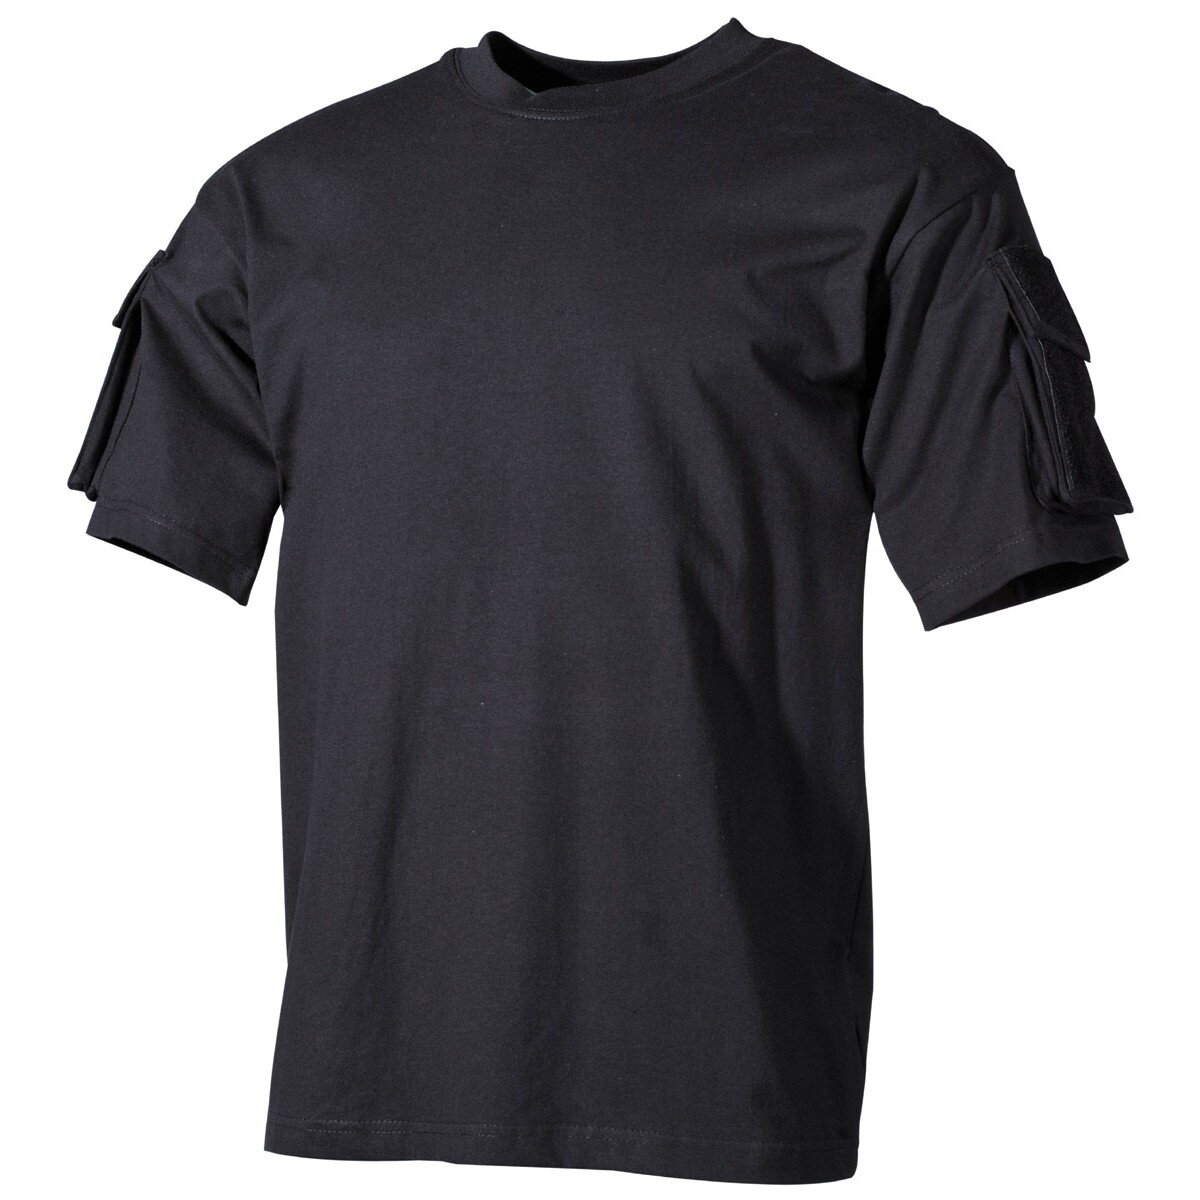 US T-Shirt, short-sleeved, black, with sleeve pockets